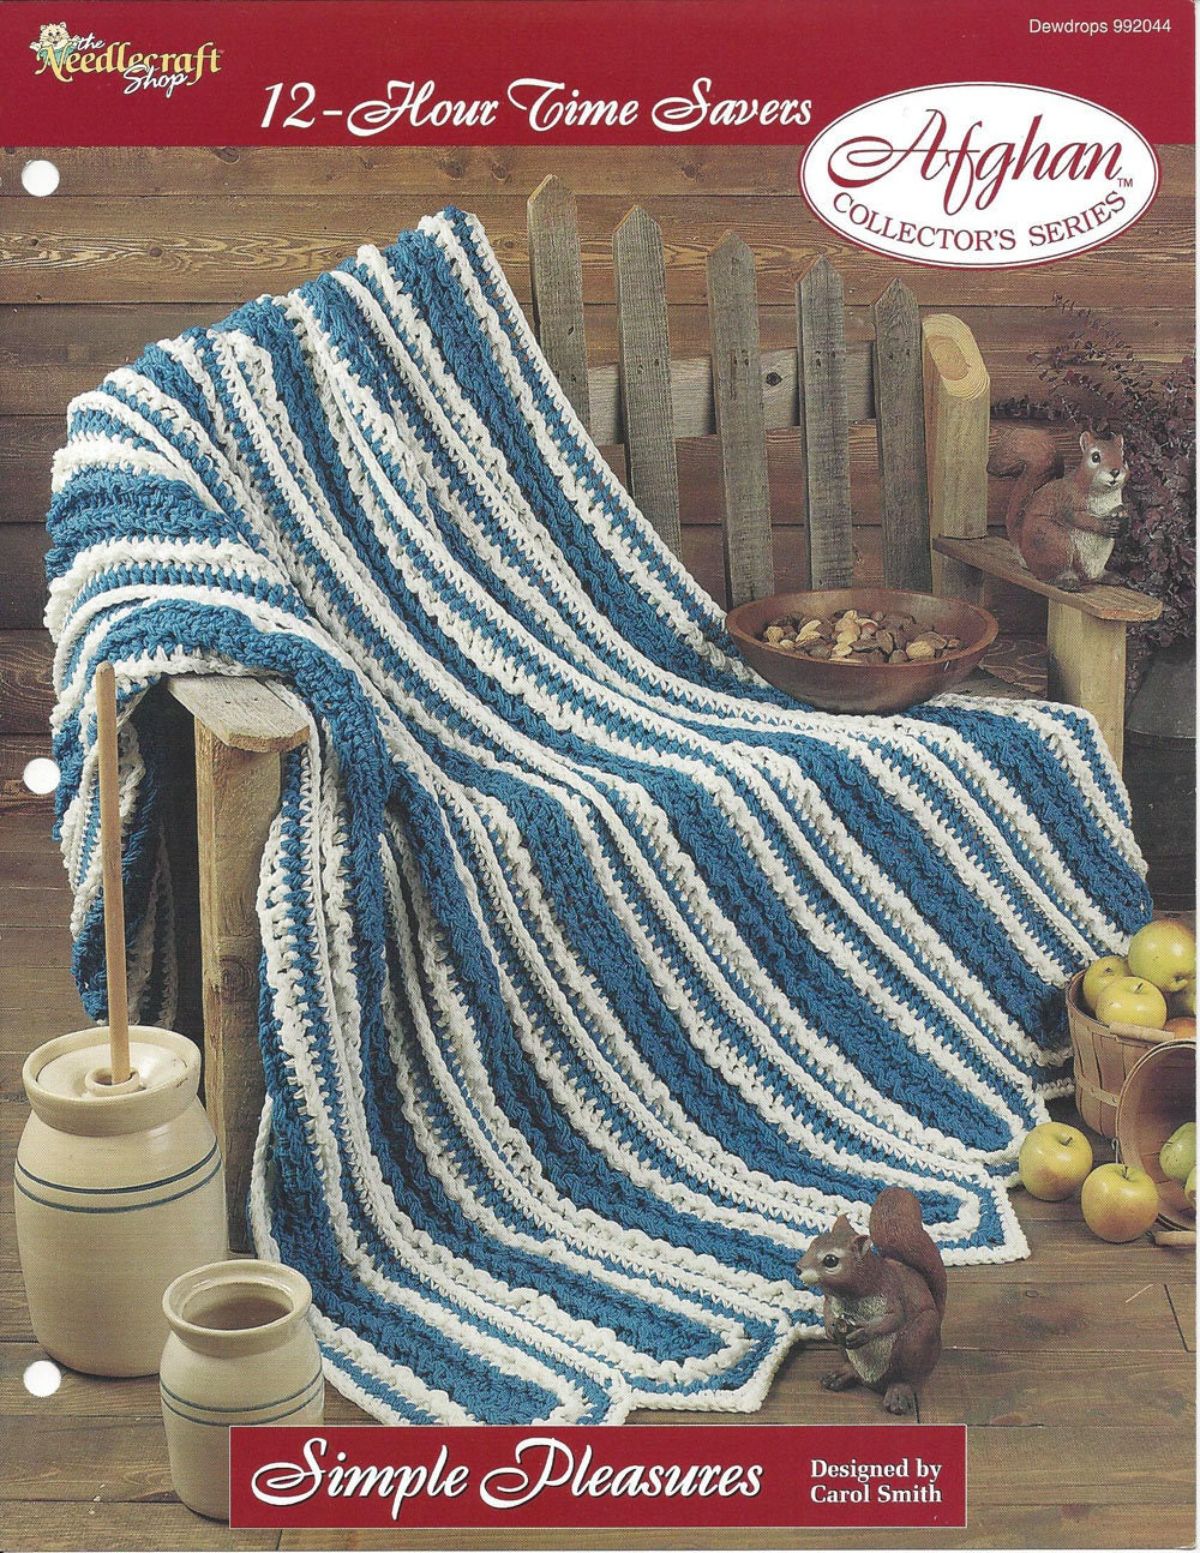 Blue and white vertical striped afghan with rounded edges draped over a wooden chair surrounded by squirrels and butter churners. 